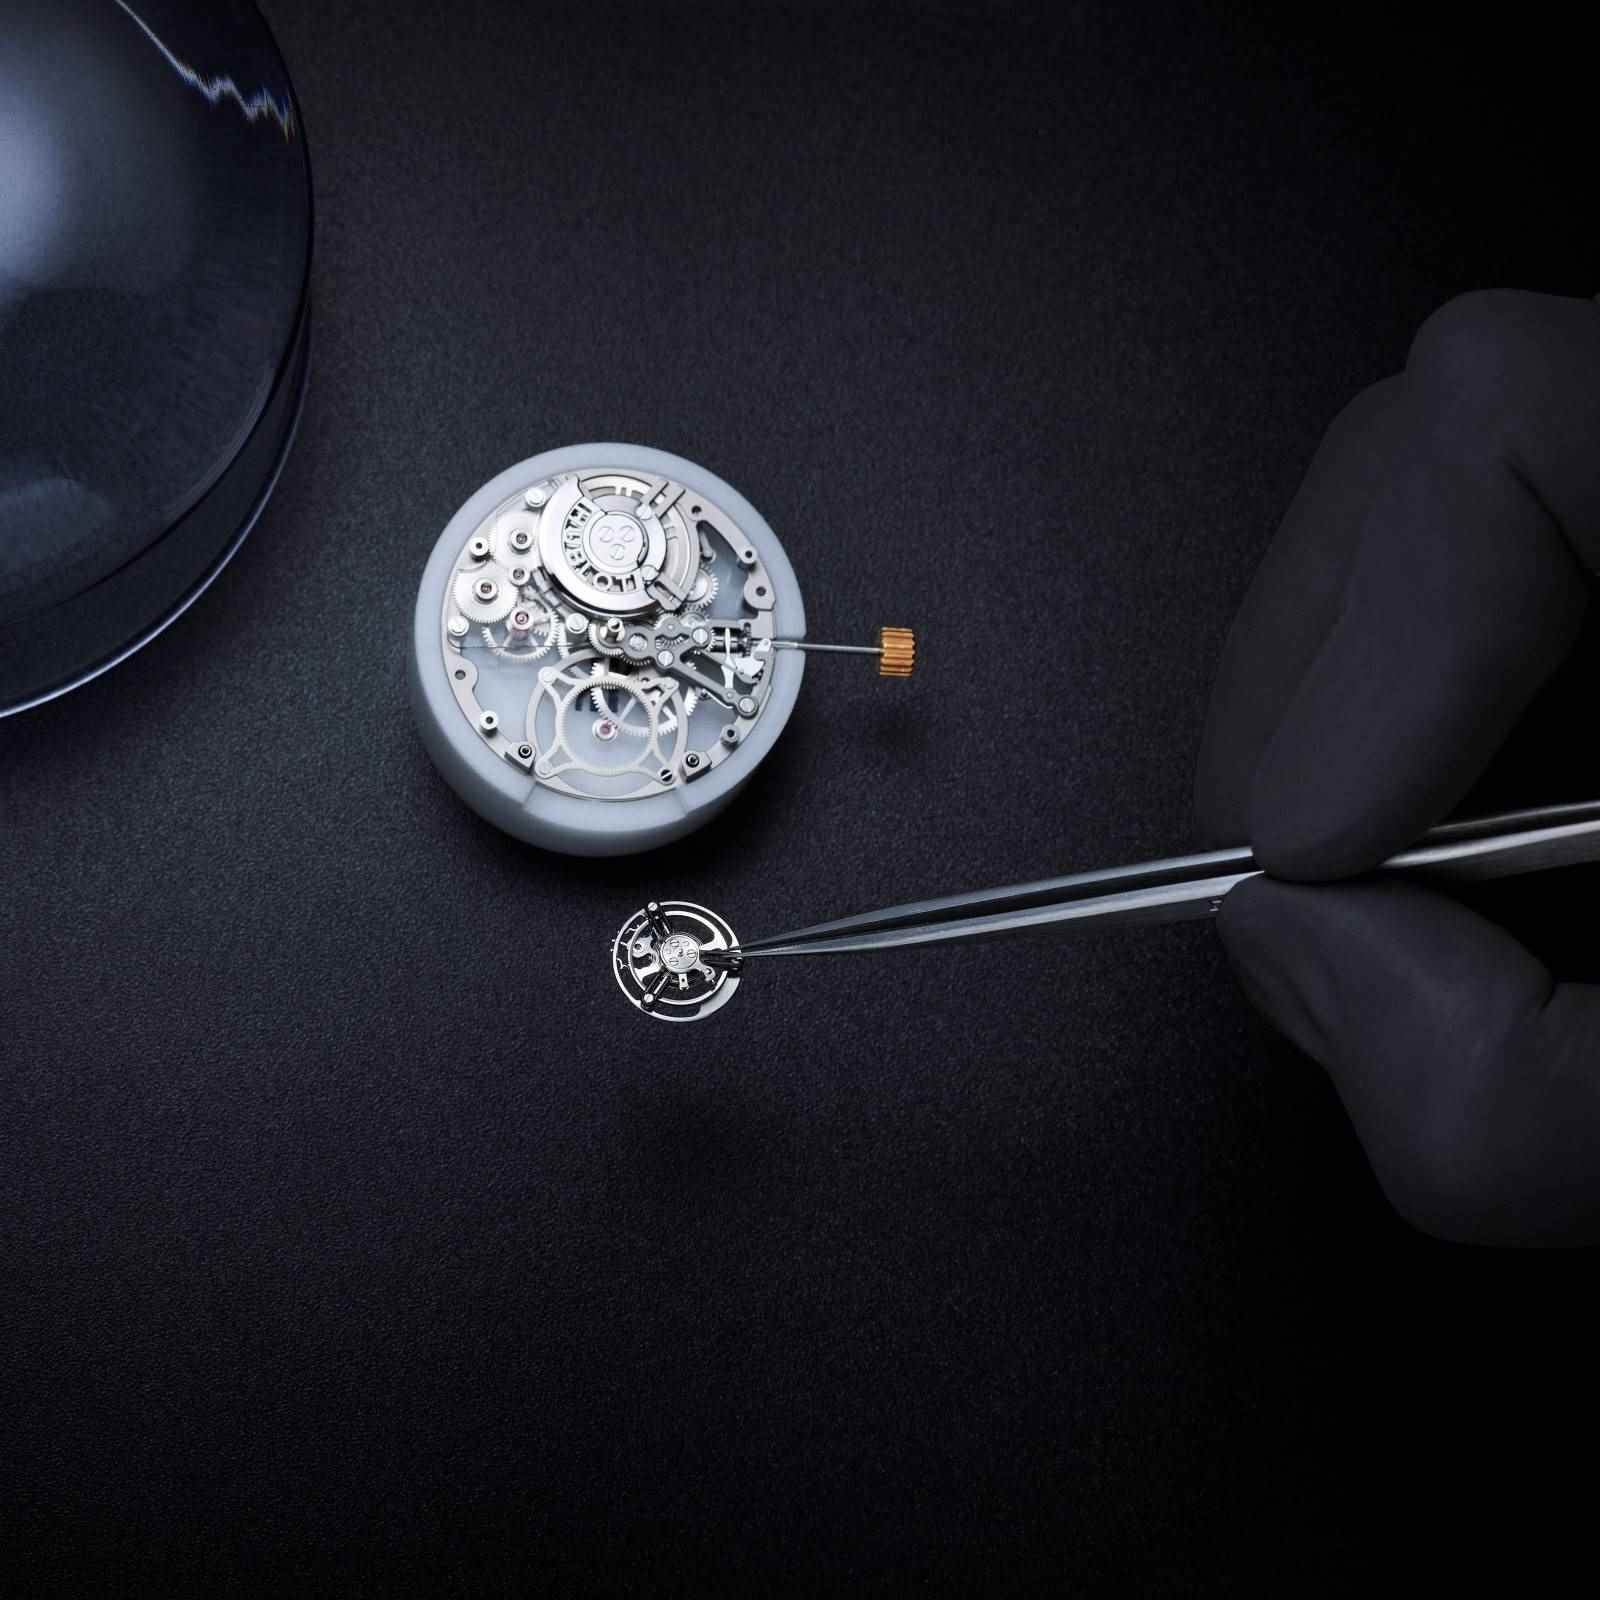 9 TIPS FOR ACCURATE MAINTENANCE OF TIMEPIECES